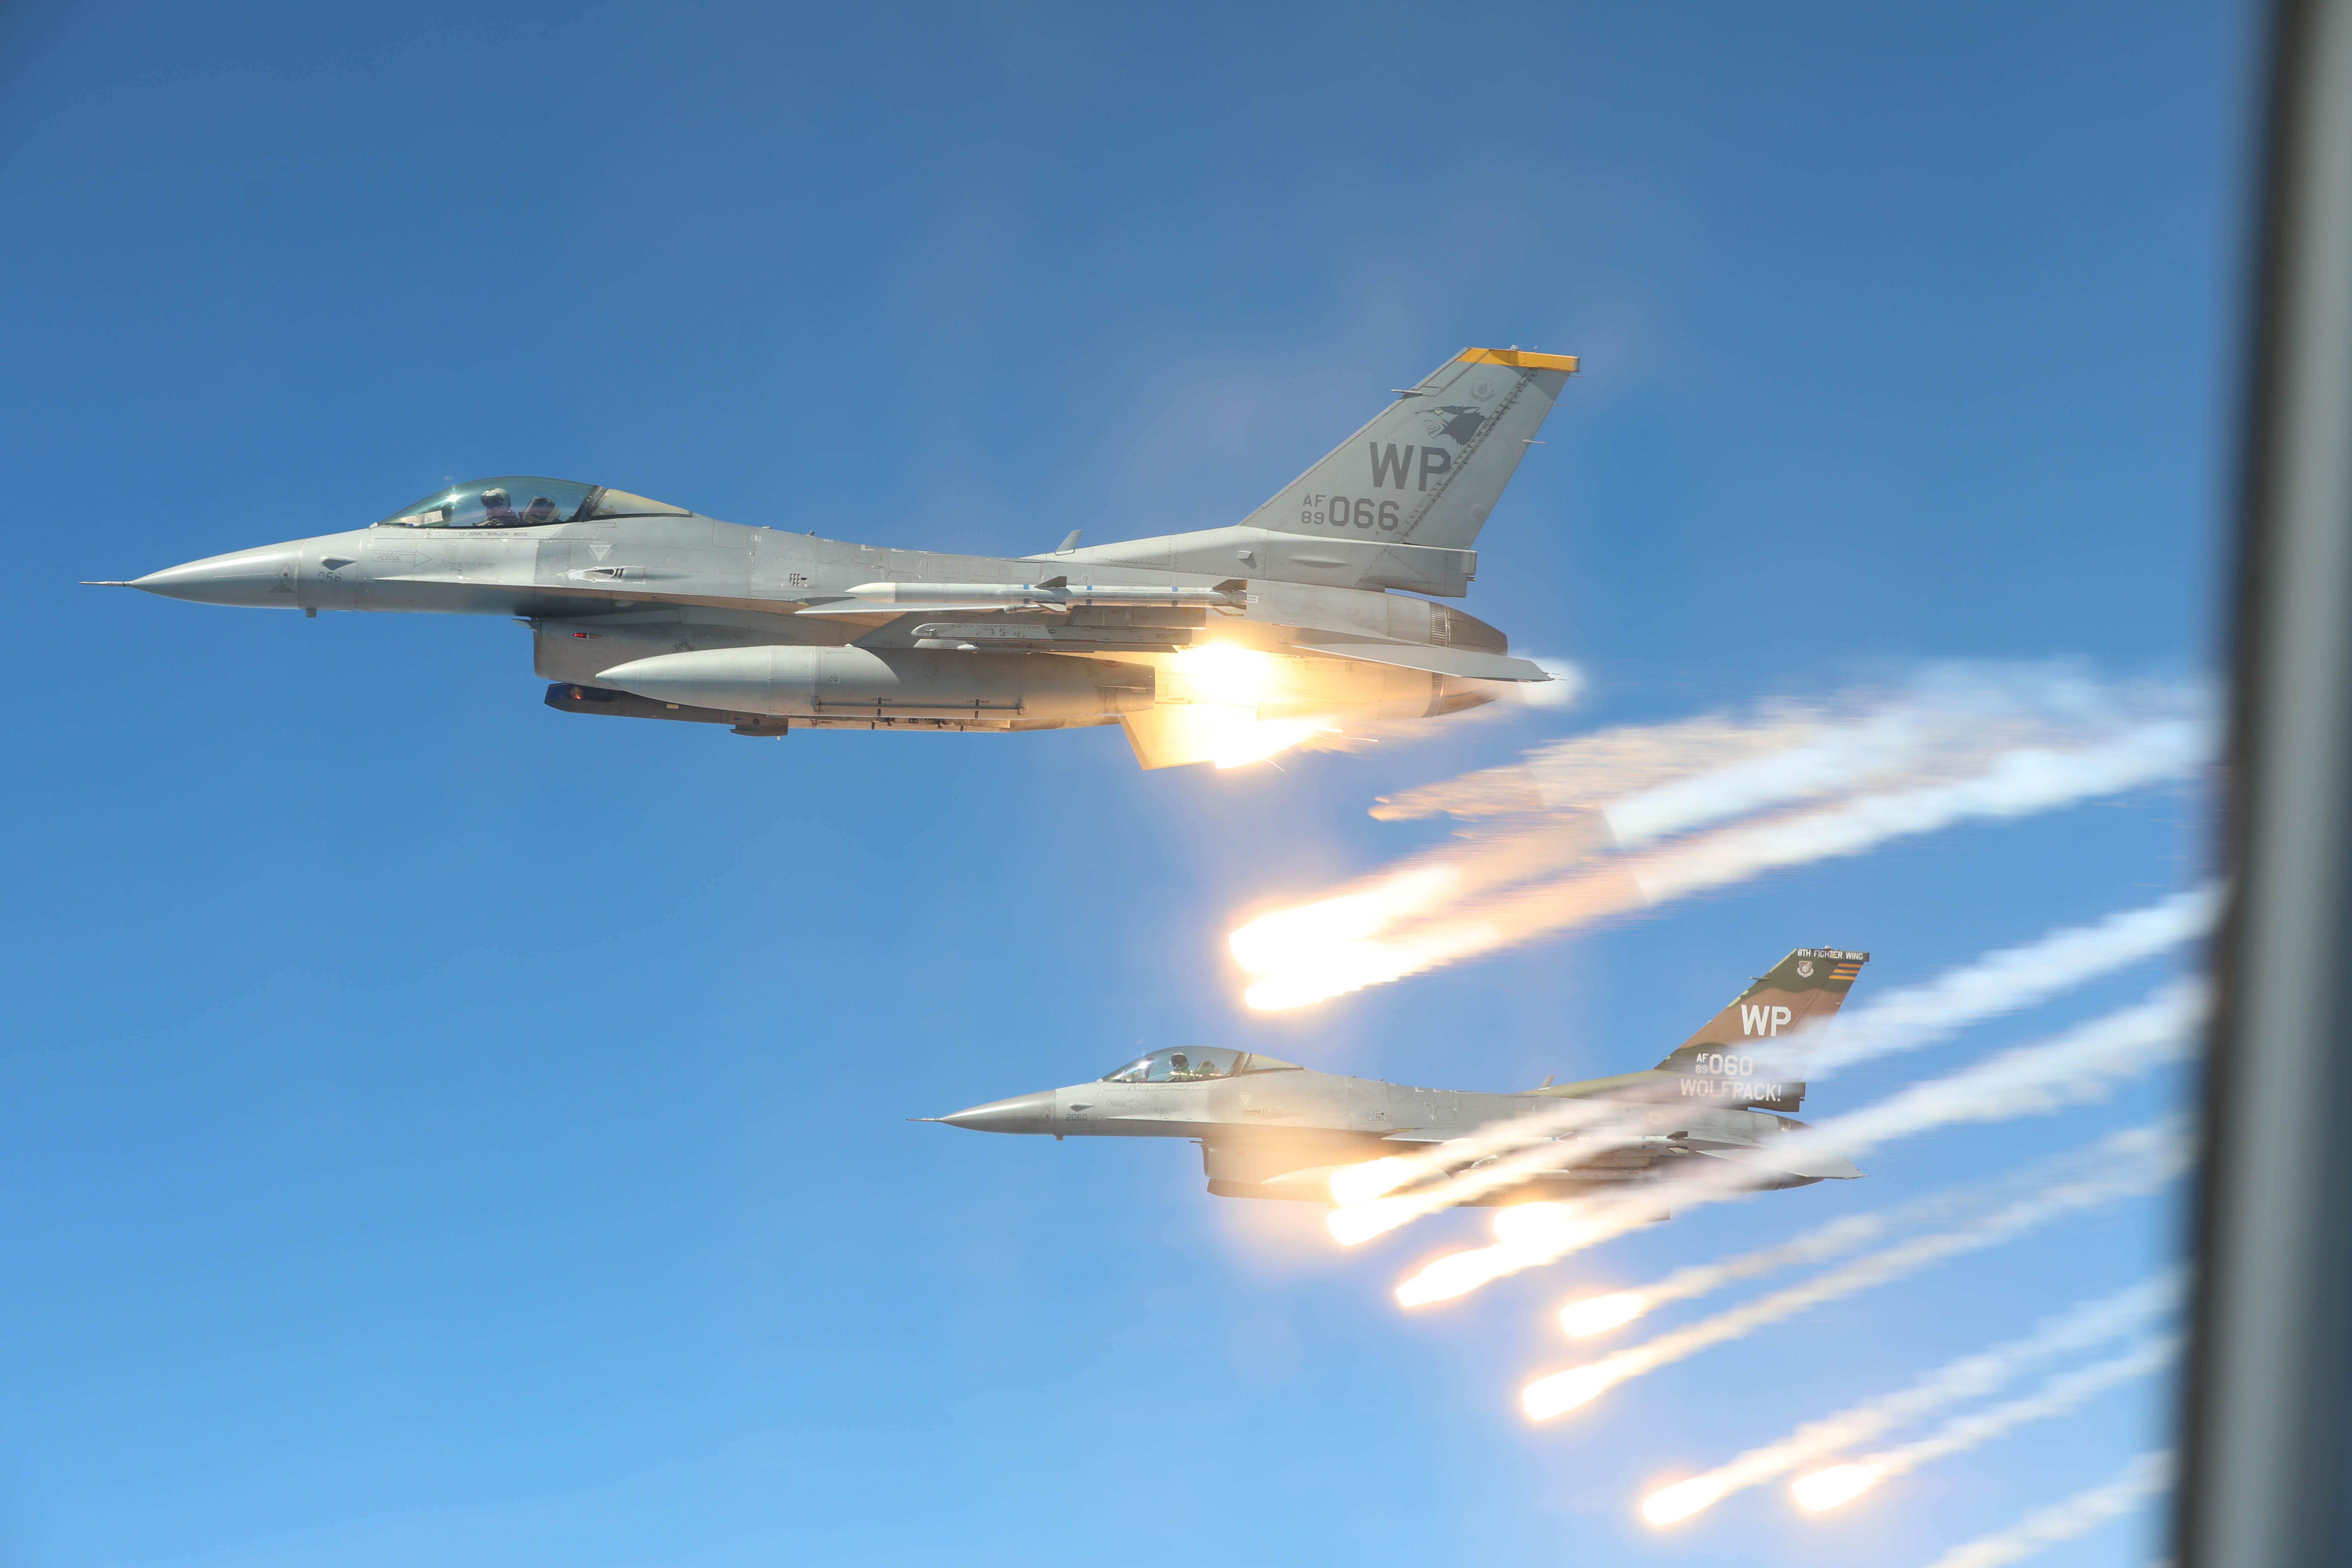 Two Lockheed Martin F-16 Fighting Falcons deploying their flares.